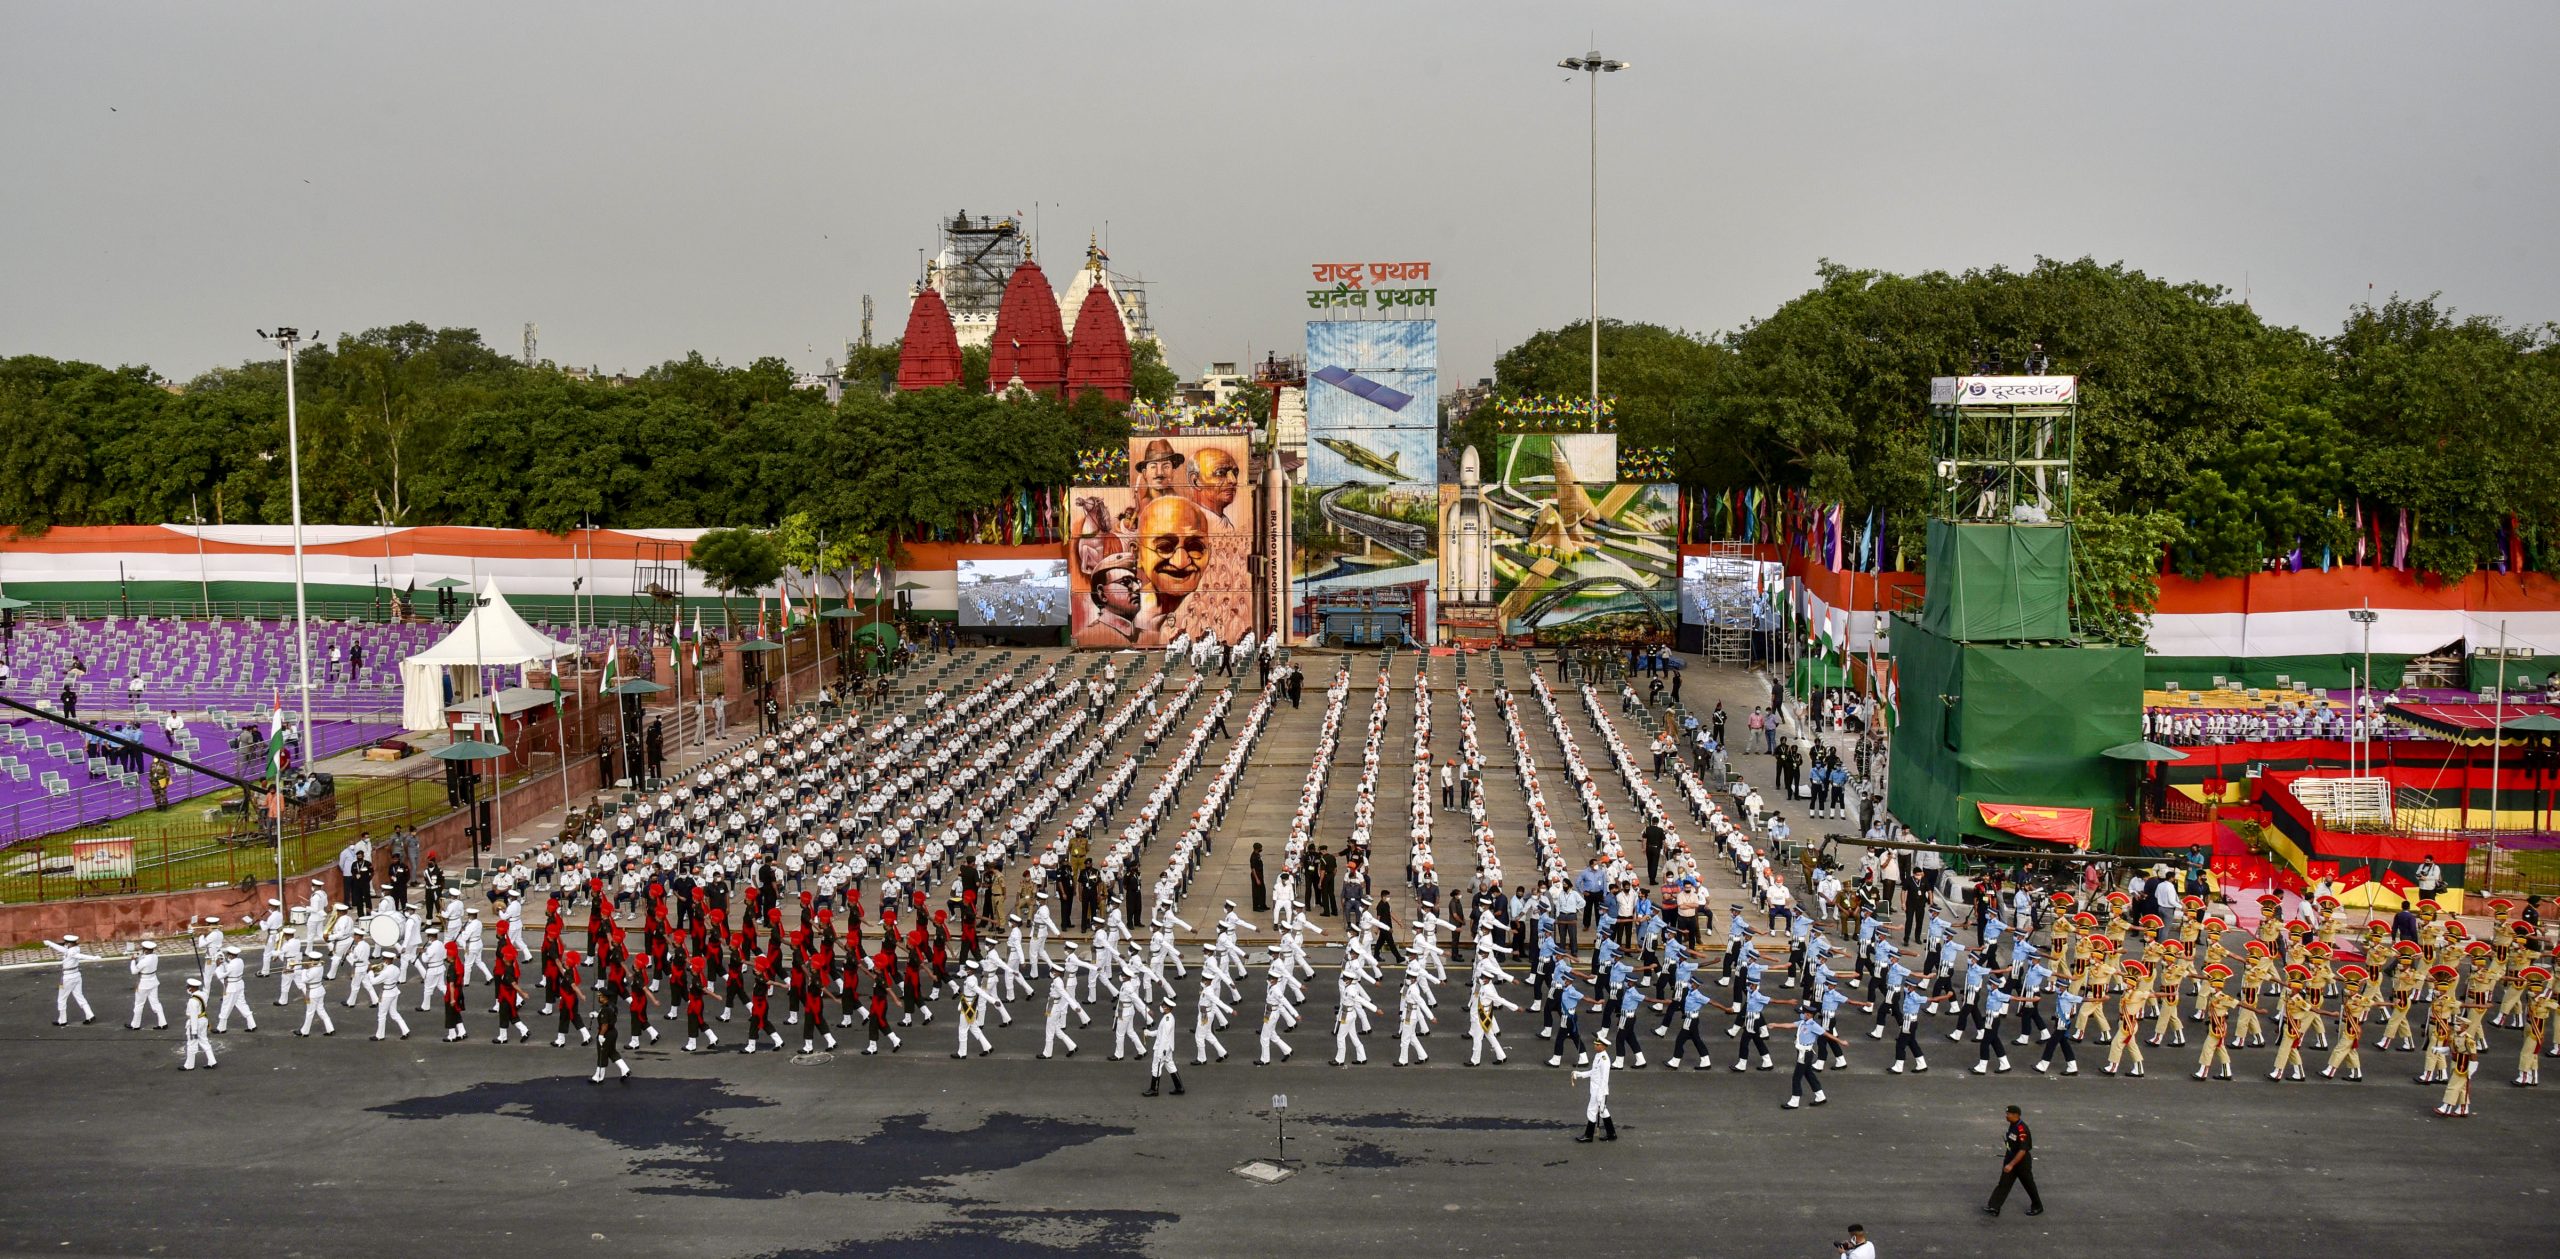 COVID guidelines in place for 75th Independence Day event at Red Fort